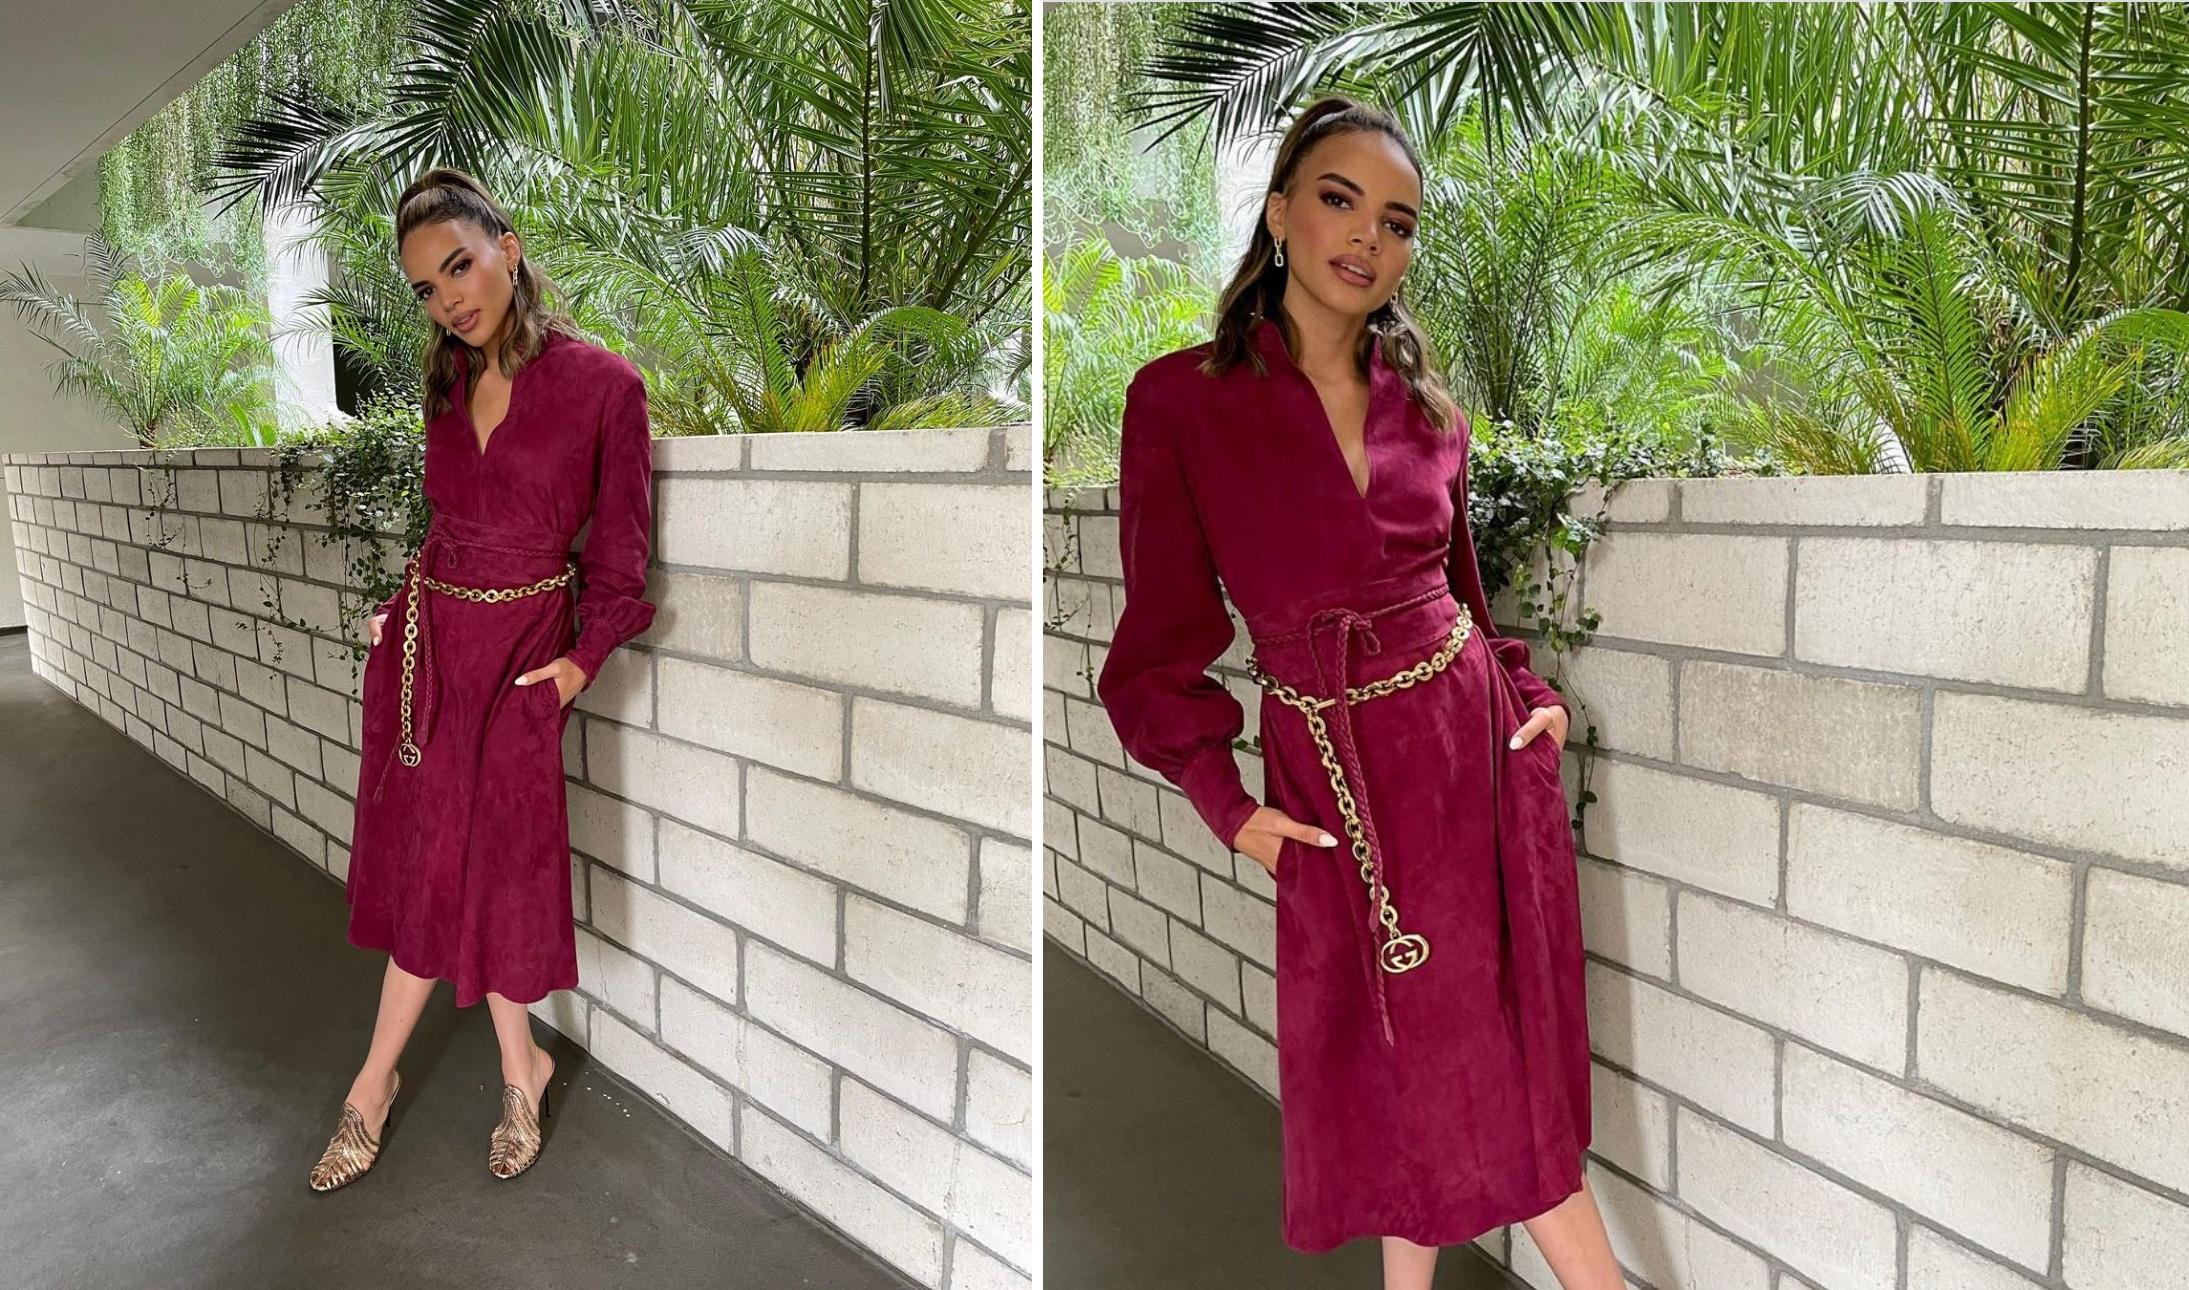 Shop 5 Gold Chain Belts Inspired By Leslie Grace's Gucci Outfit